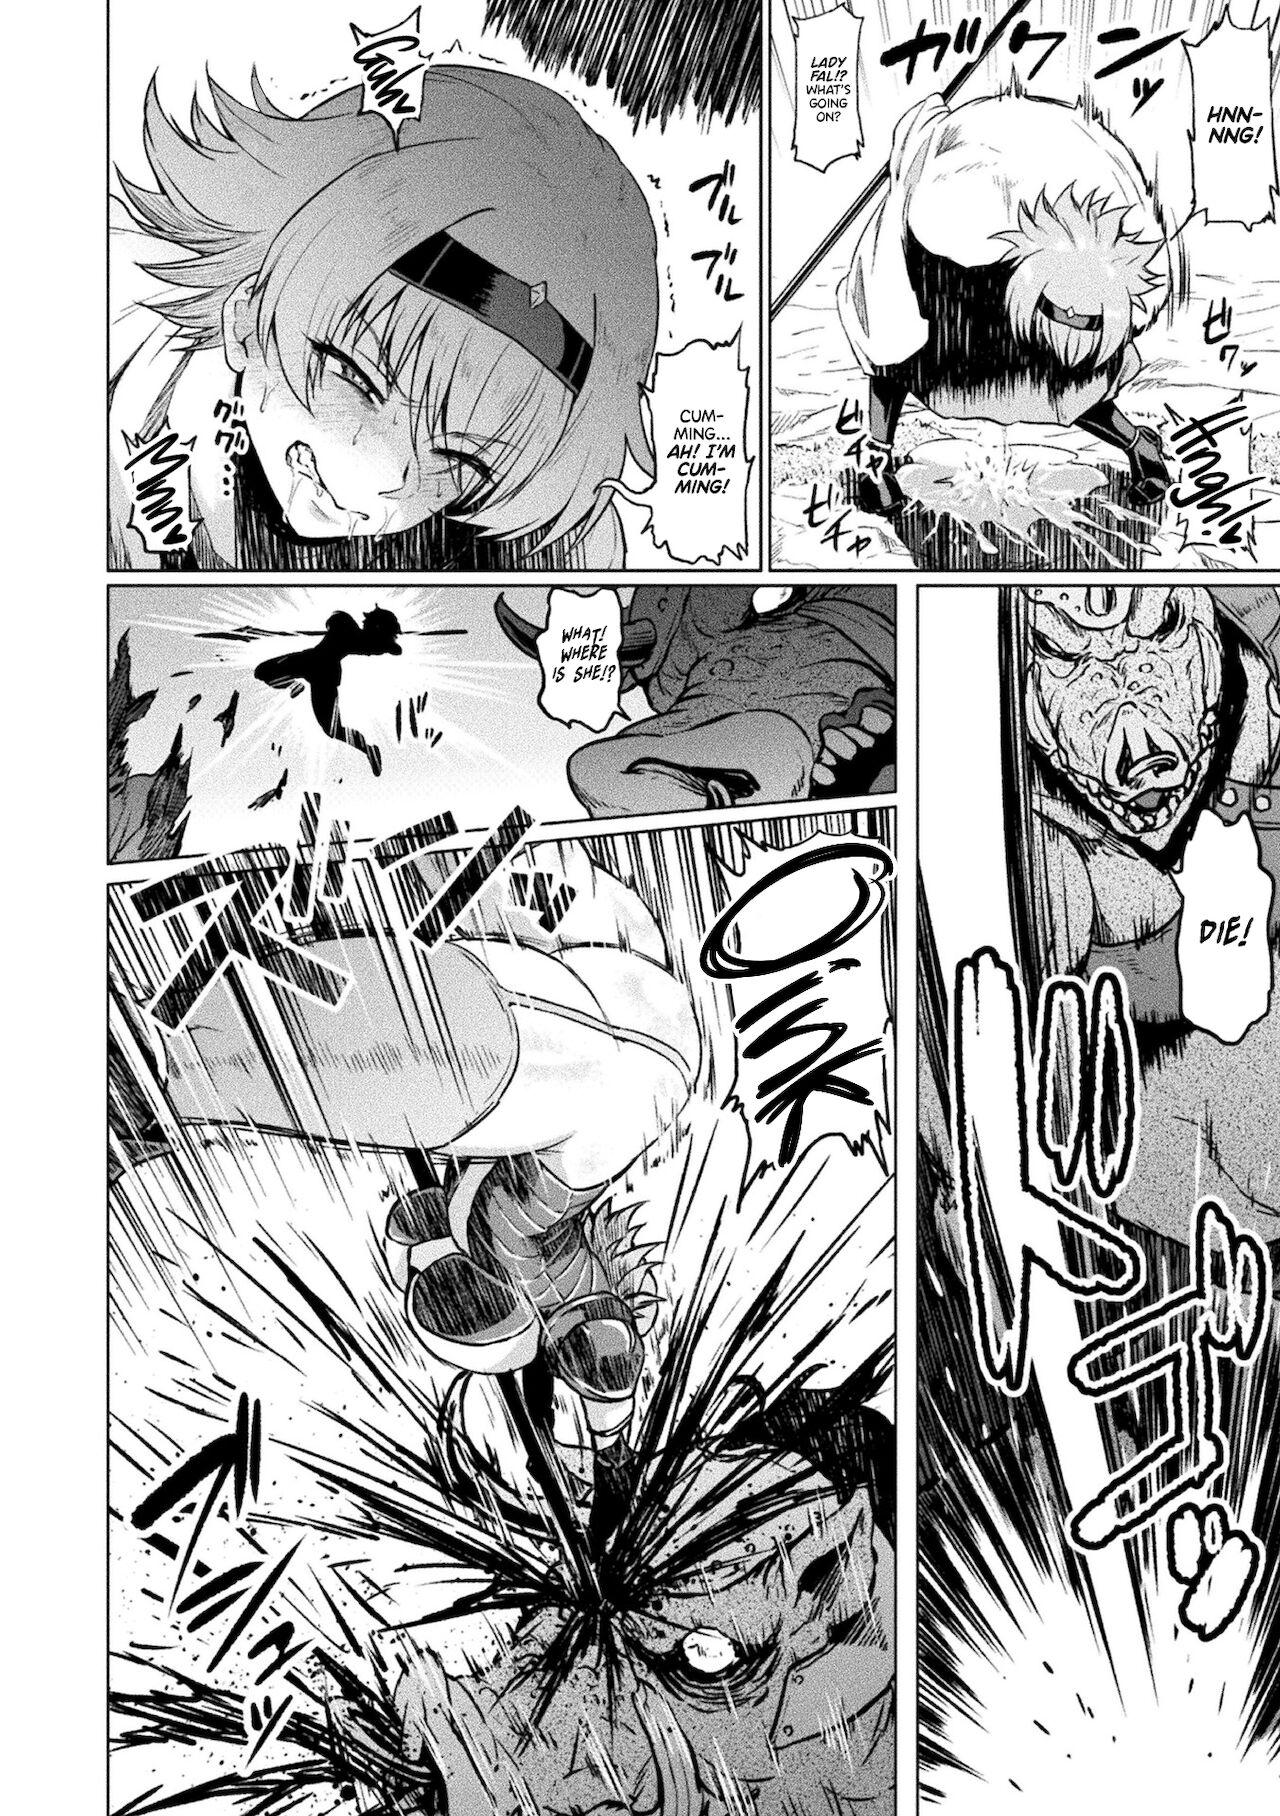 Oral Sex Faru to Noroi no Soubi | Fal and the Cursed Armor Teenpussy - Page 6